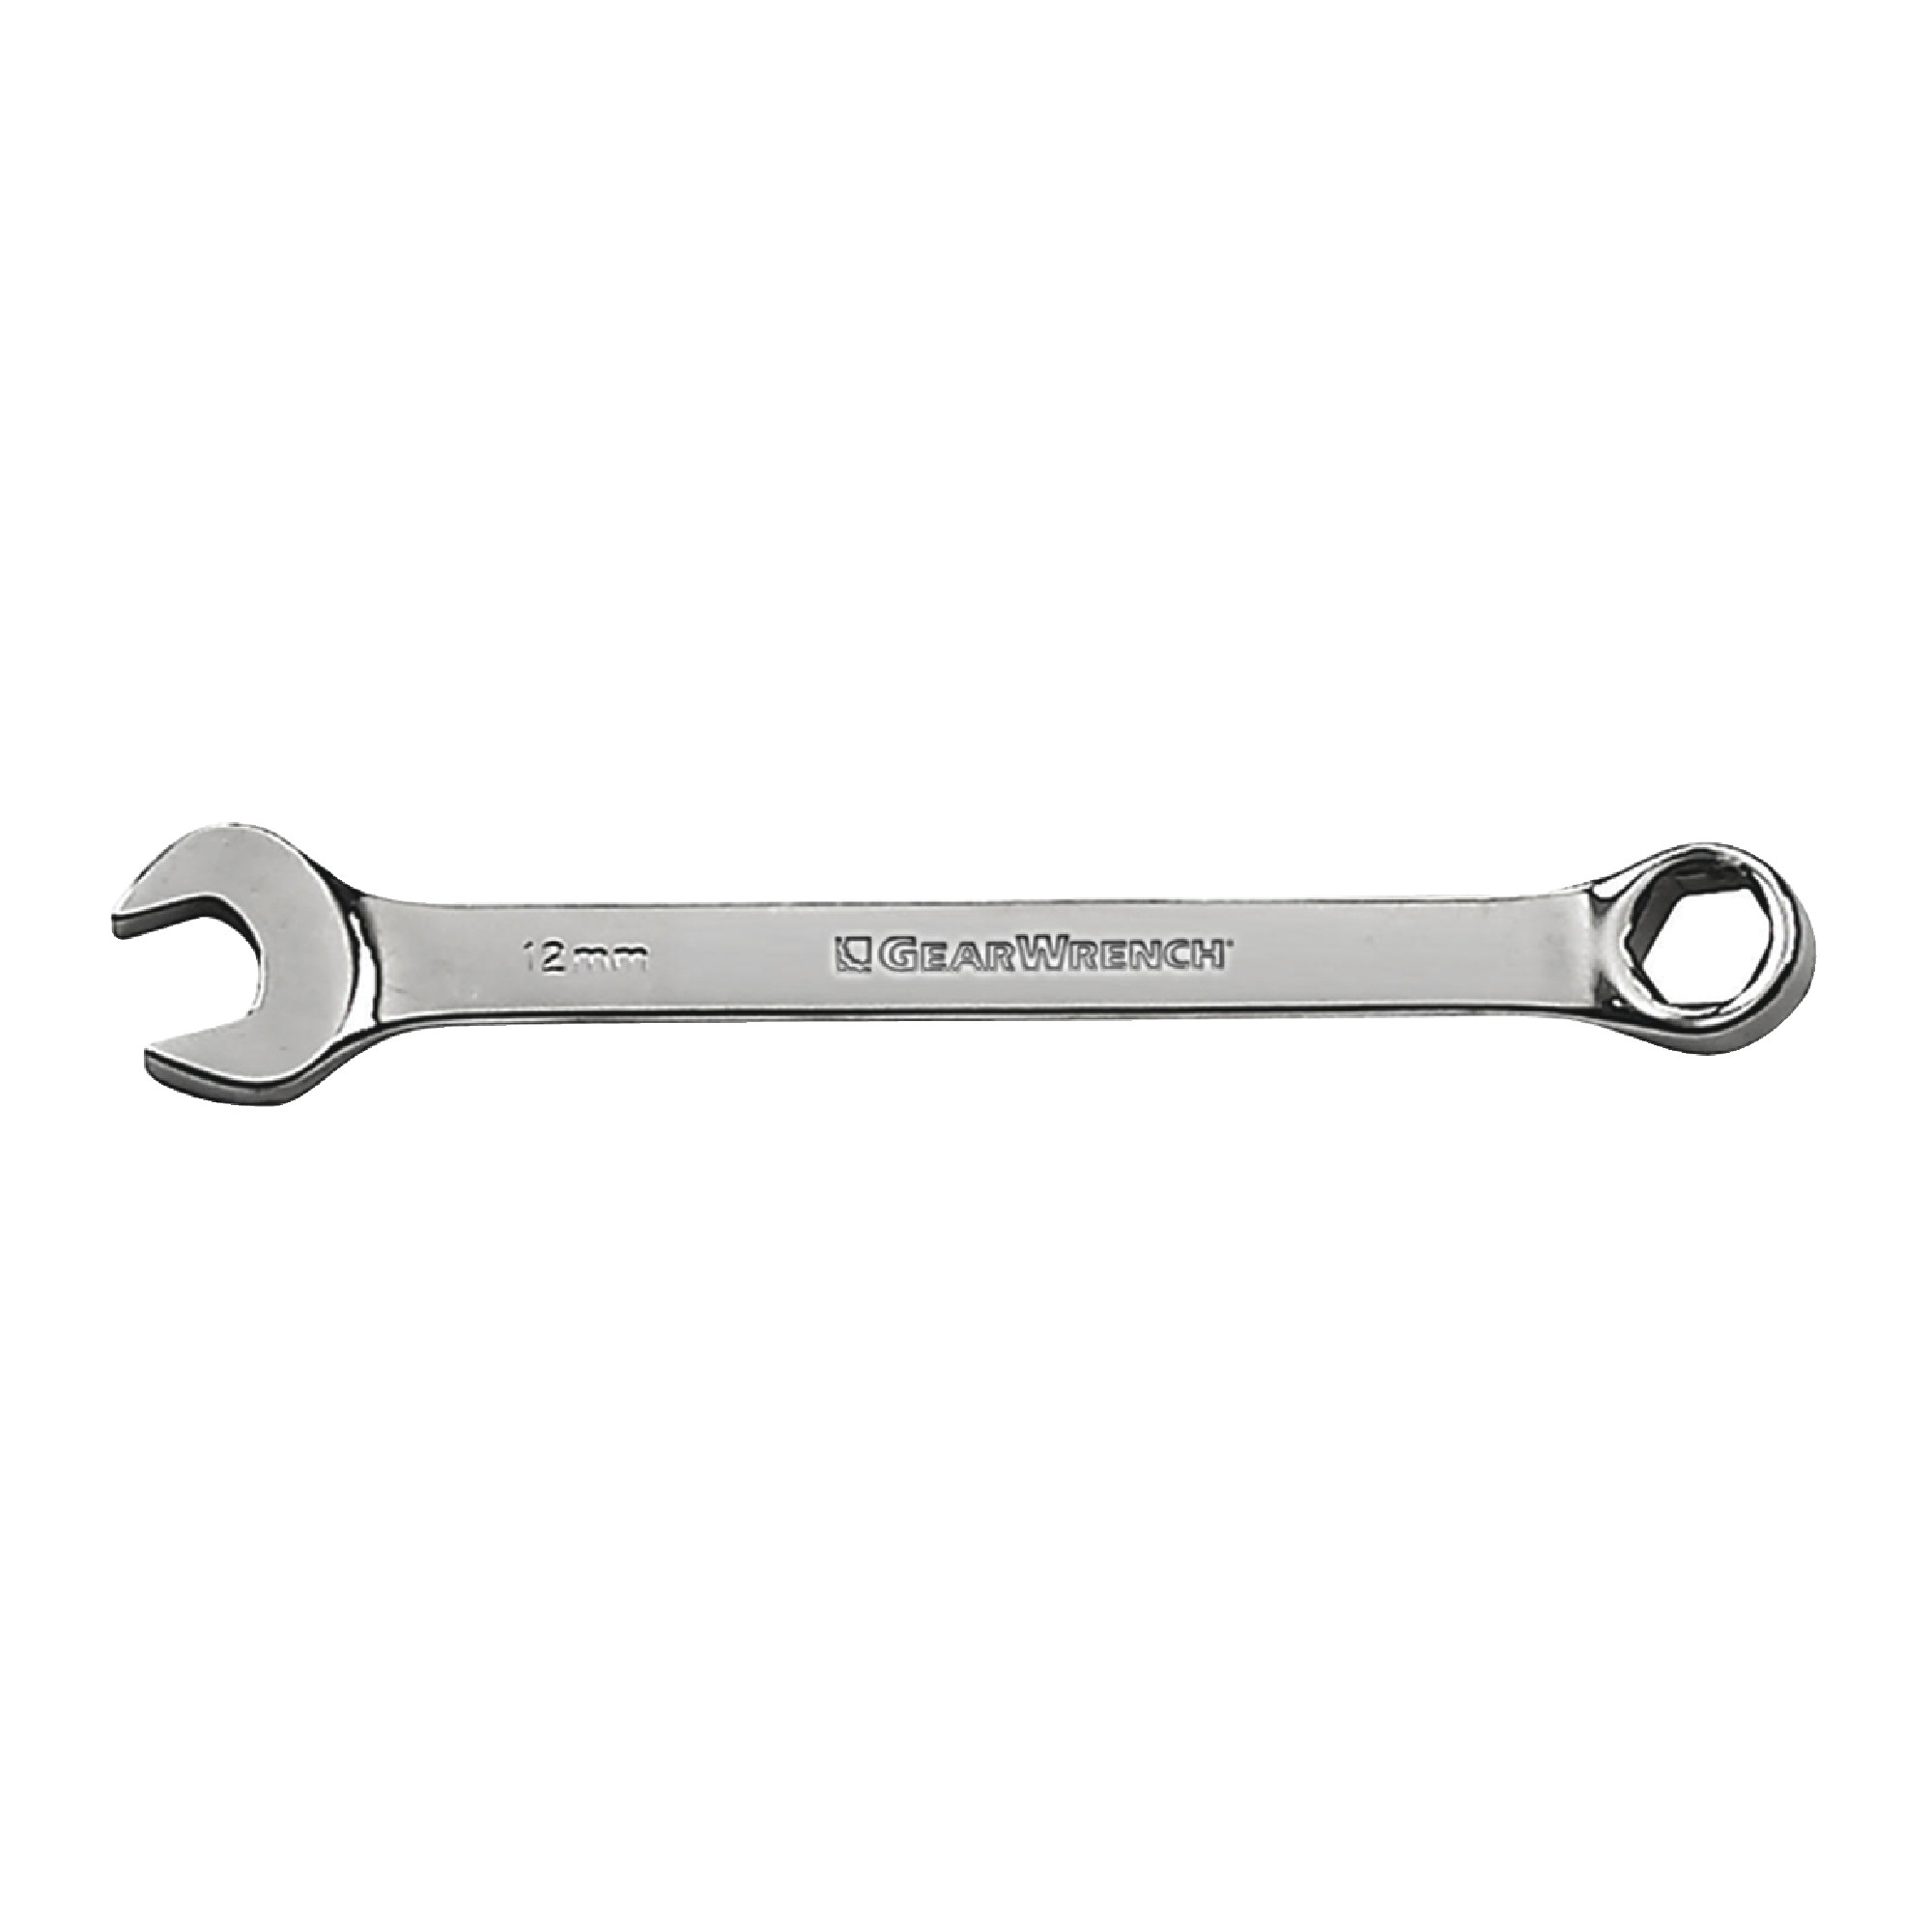 17mm 6 Point Combination Wrench